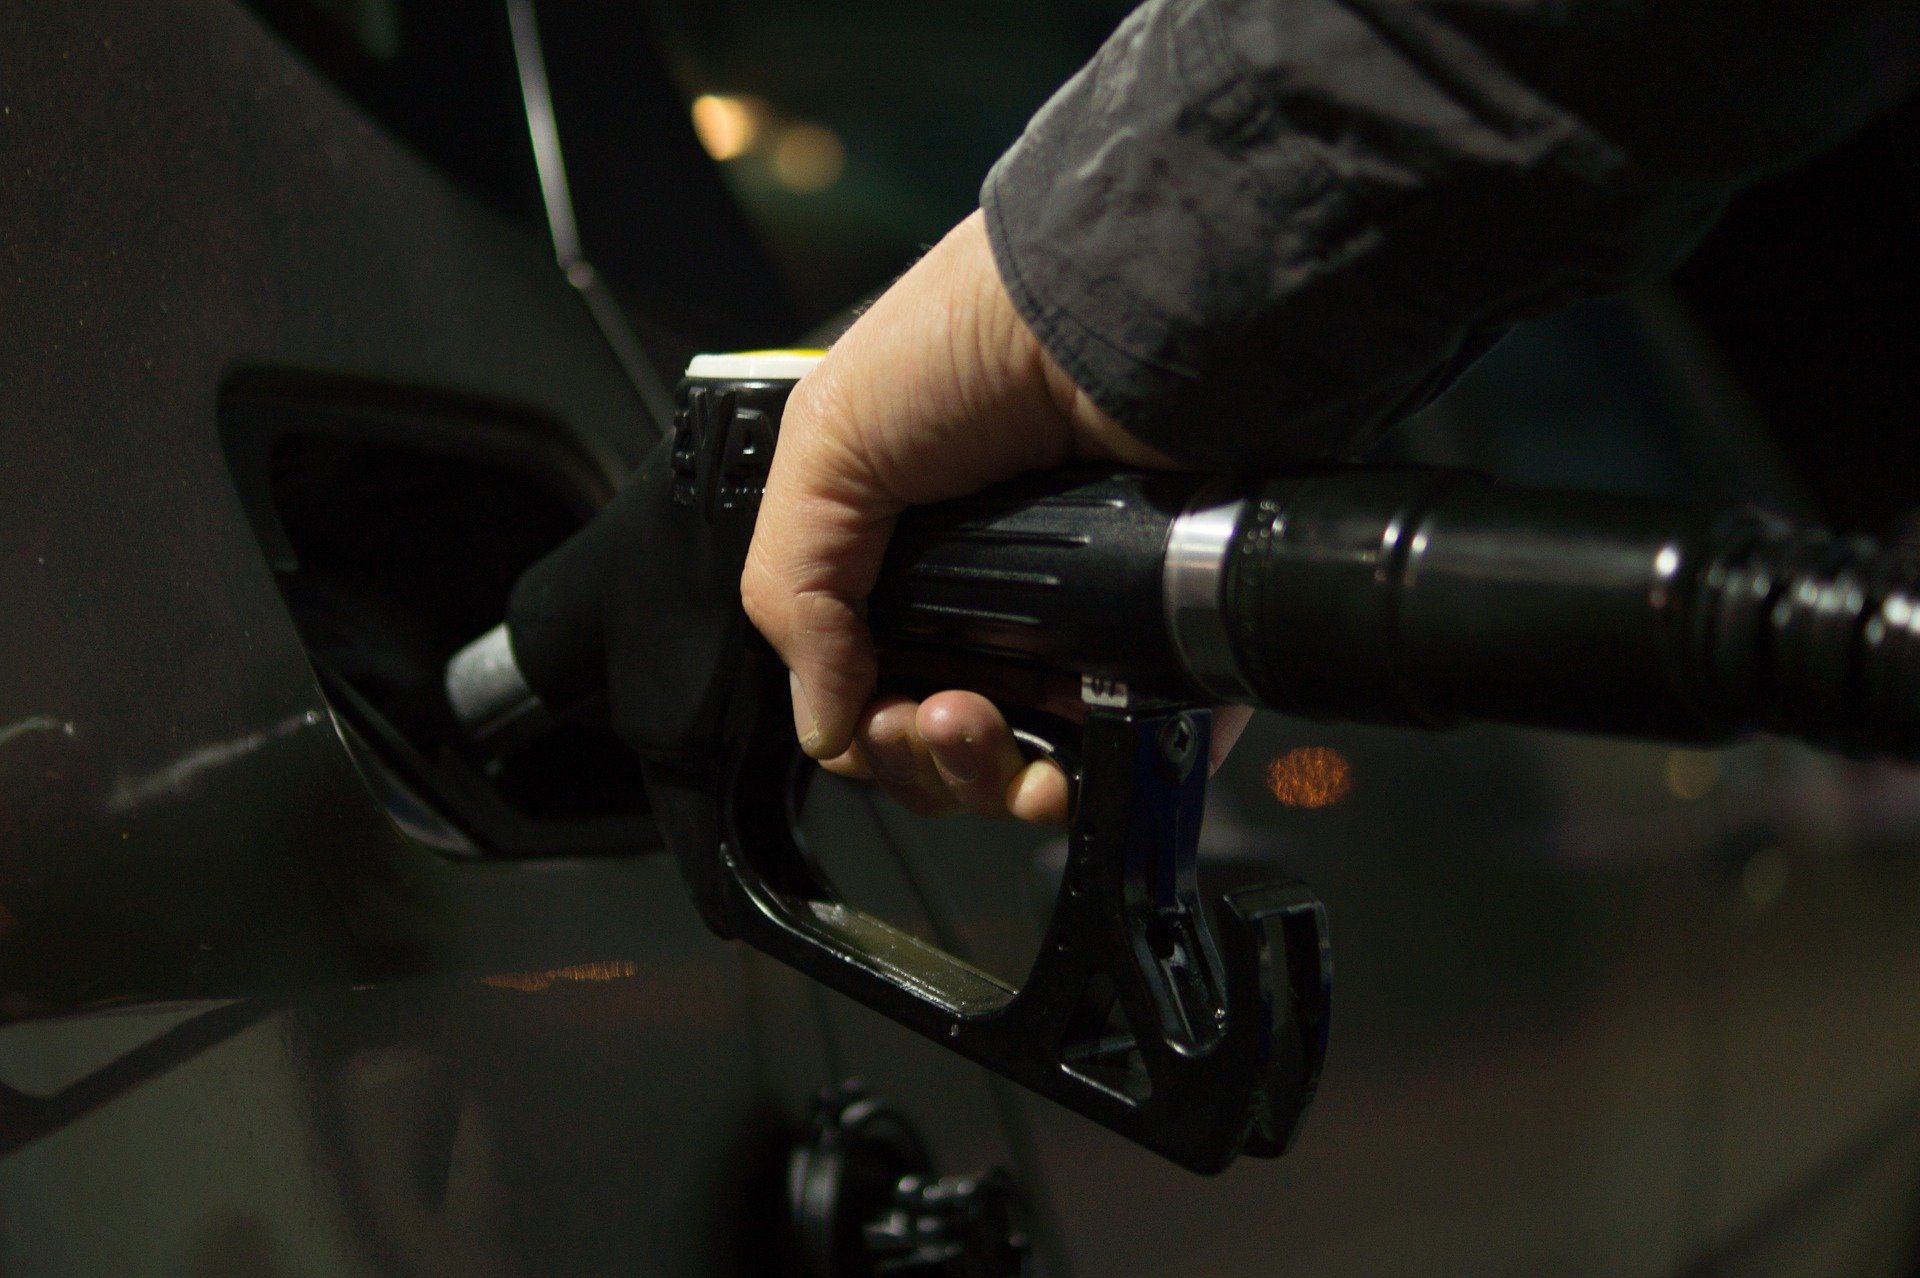 Fuel prices: Petrol priced at Rs 95.41, diesel Rs 86.67 in Delhi on January 28, 2022